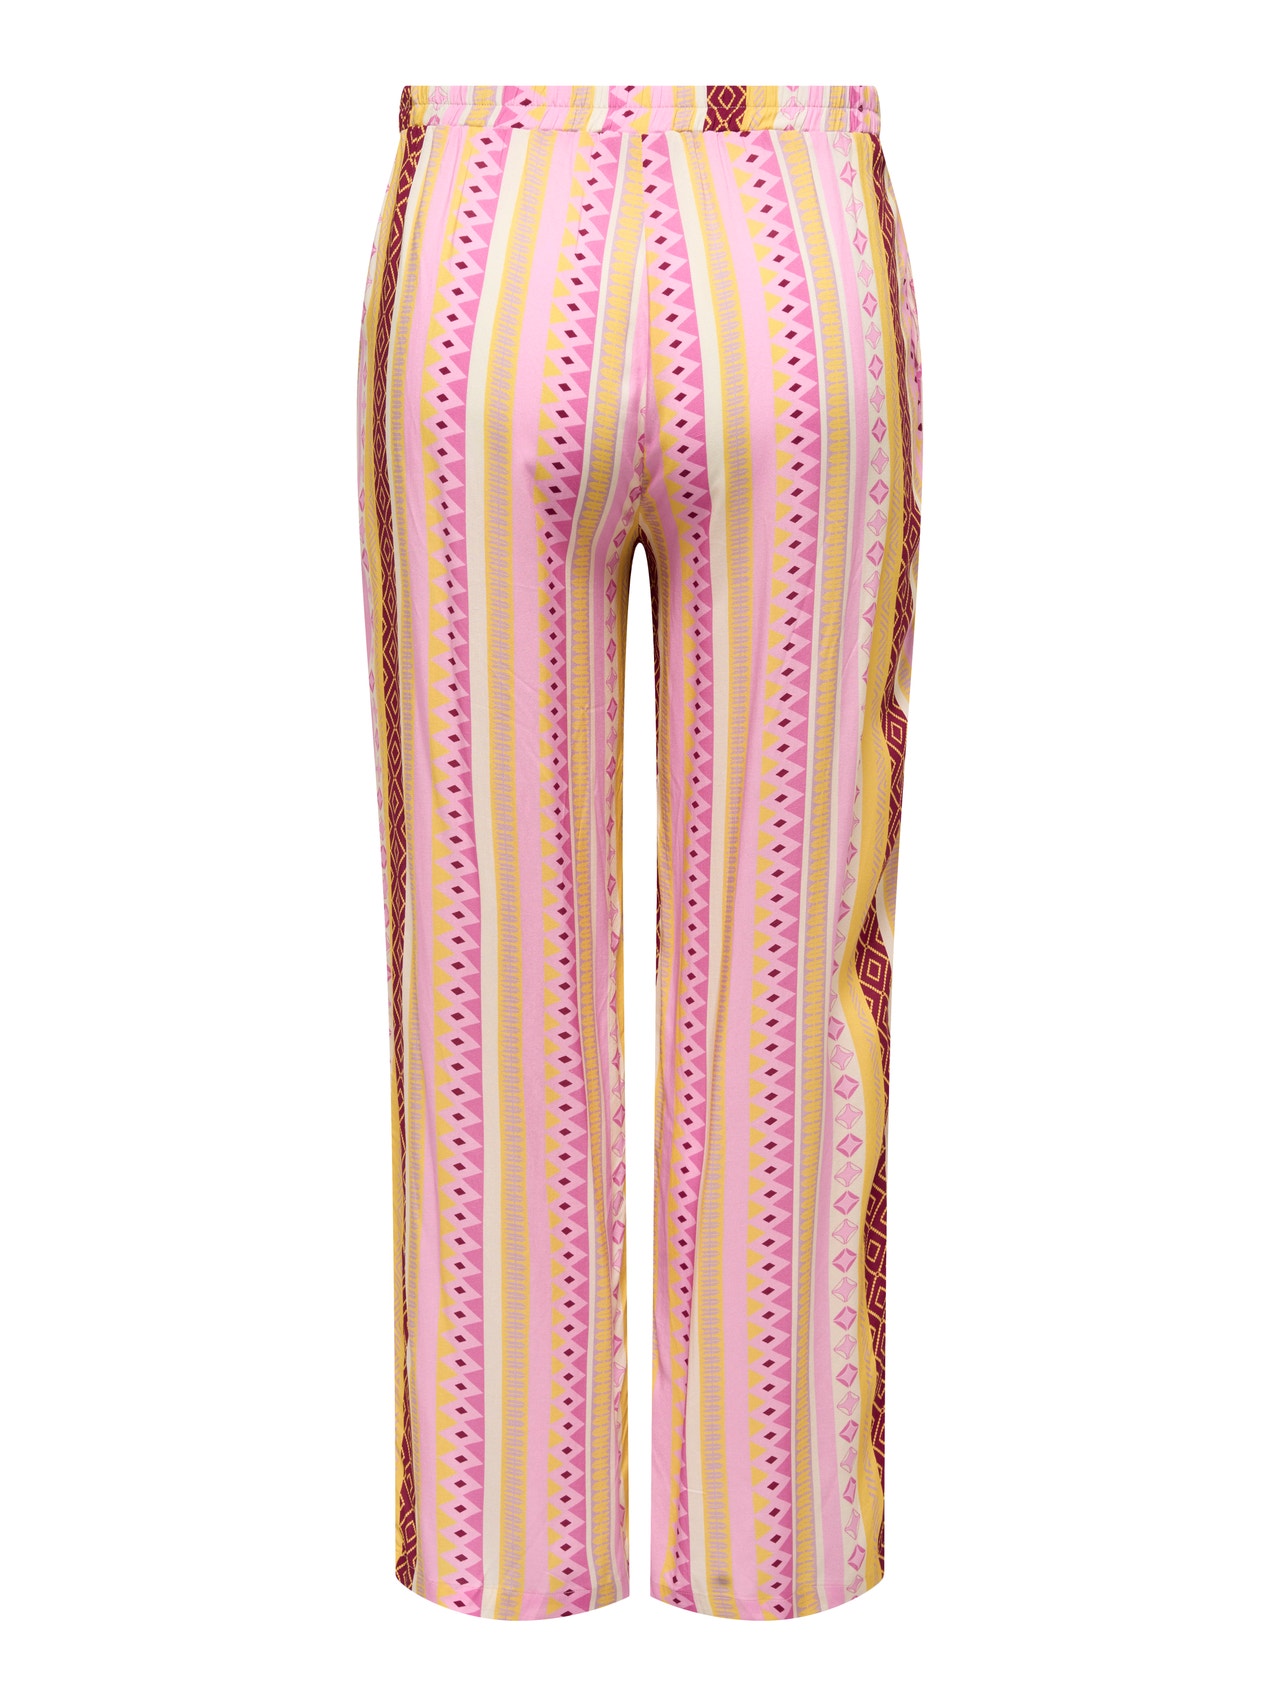 ONLY Normal geschnitten Mittlere Taille Hose -Prism Pink - 15256365